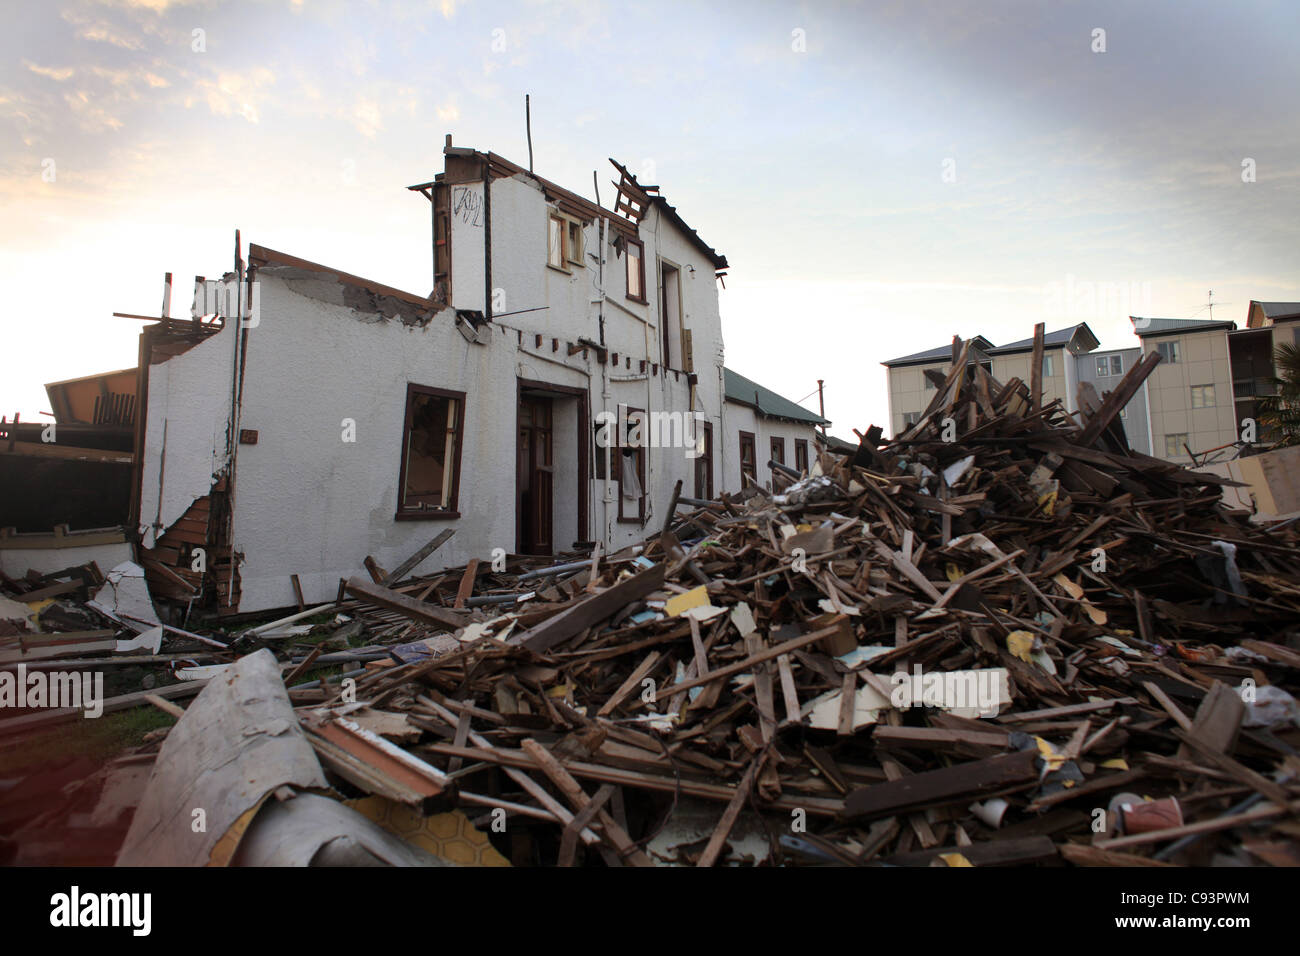 A general view shows quake-damaged buildings in Christchurch, New Zealand. Stock Photo